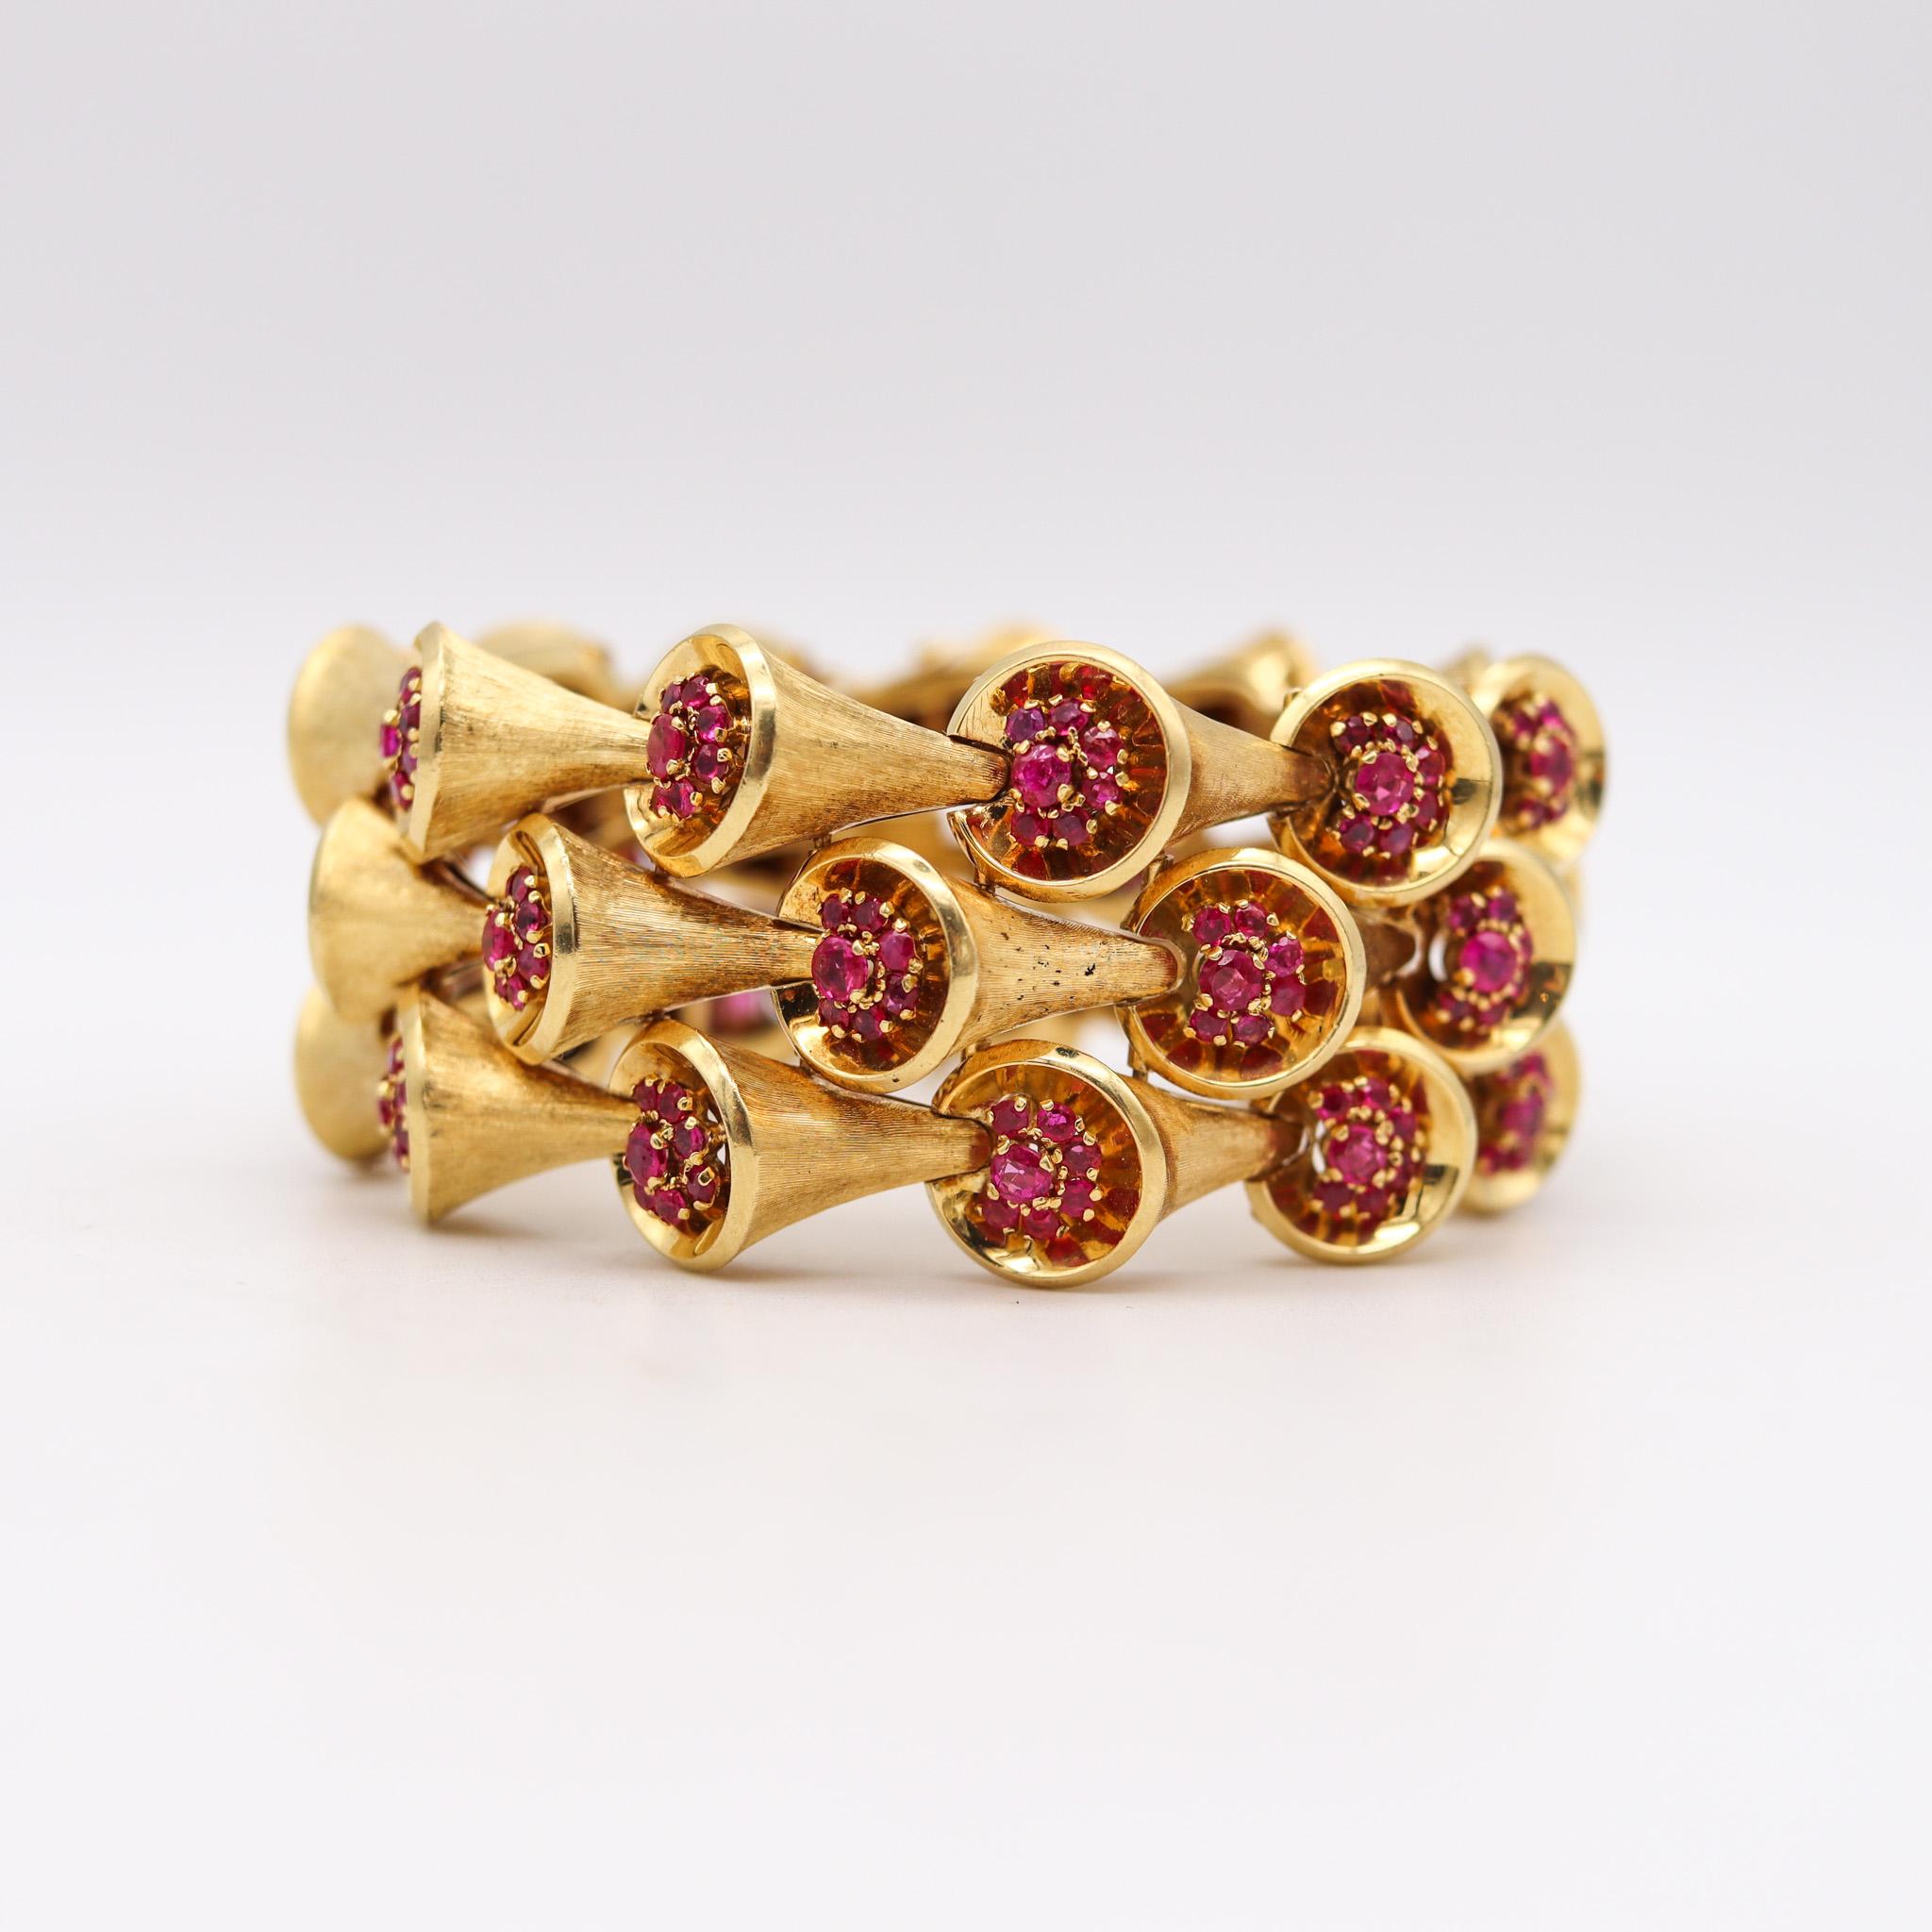 Flexible bracelet designed by Shreve & Co.

Beautiful bangle bracelet, created during the post war period by the jewelry retailers of Shreve & Co, back in the 1950's. This magnificent bracelet has been crafted in solid yellow gold of 18 karats and